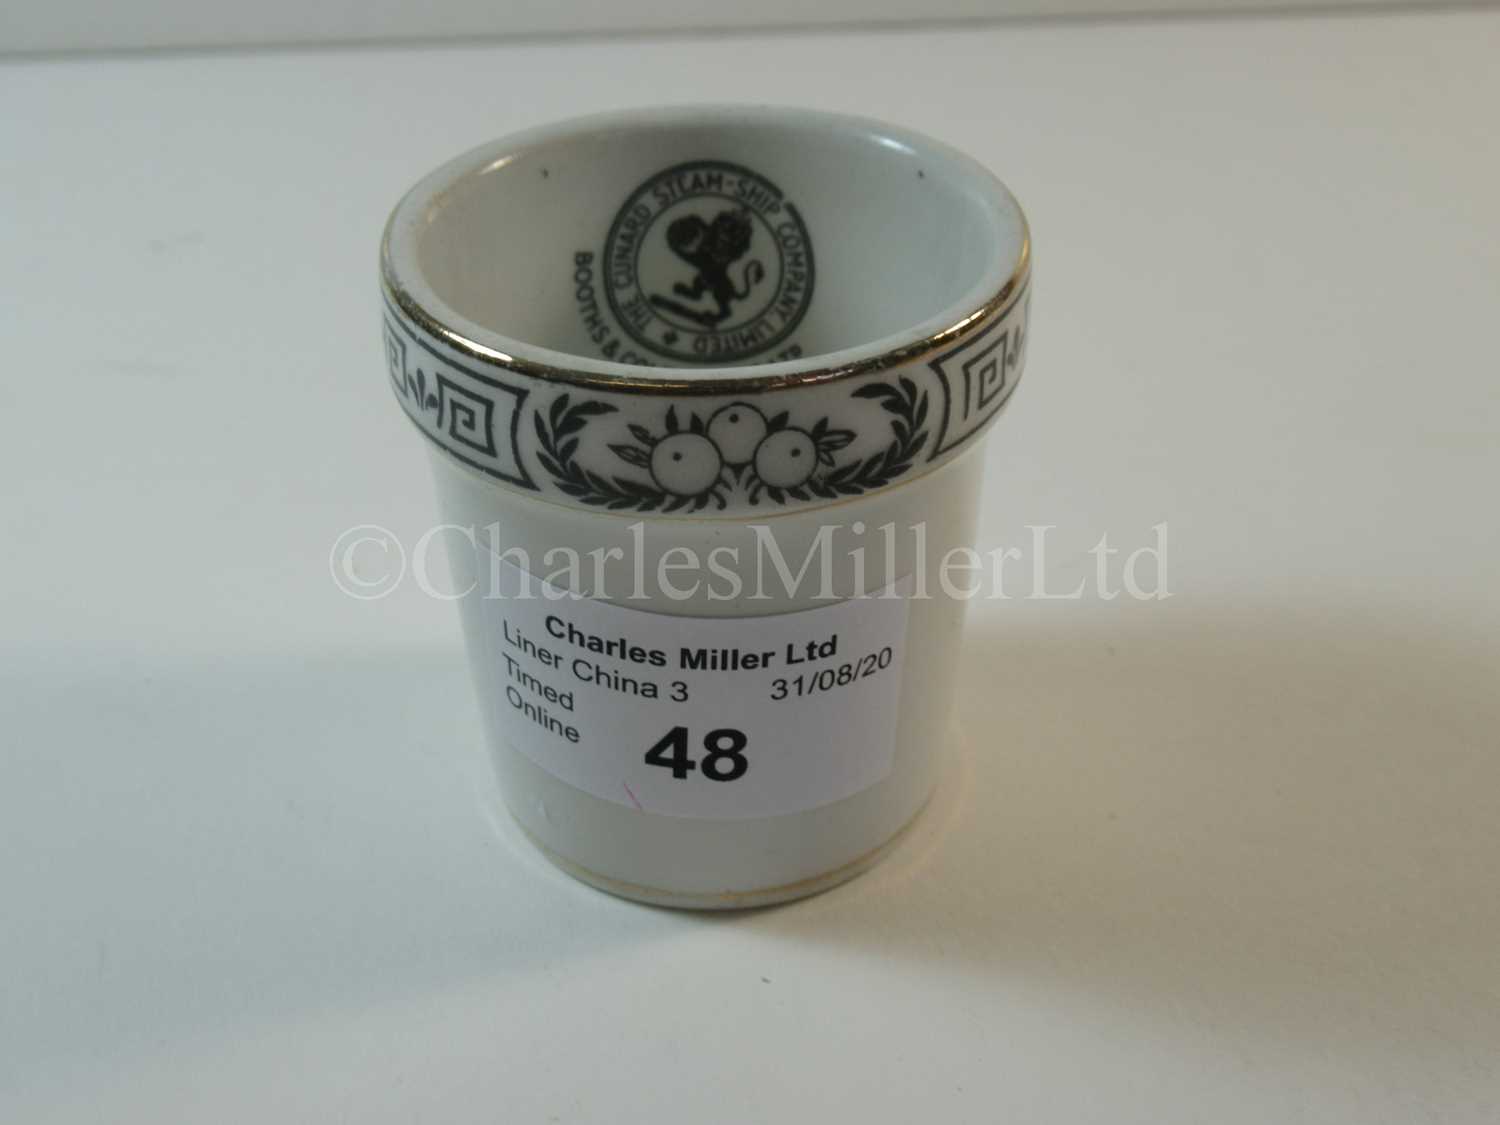 Lot 48 - A Cunard Steam Ship Company Limited egg cup, 'Aquitania' pattern used on the 'Queen Mary'